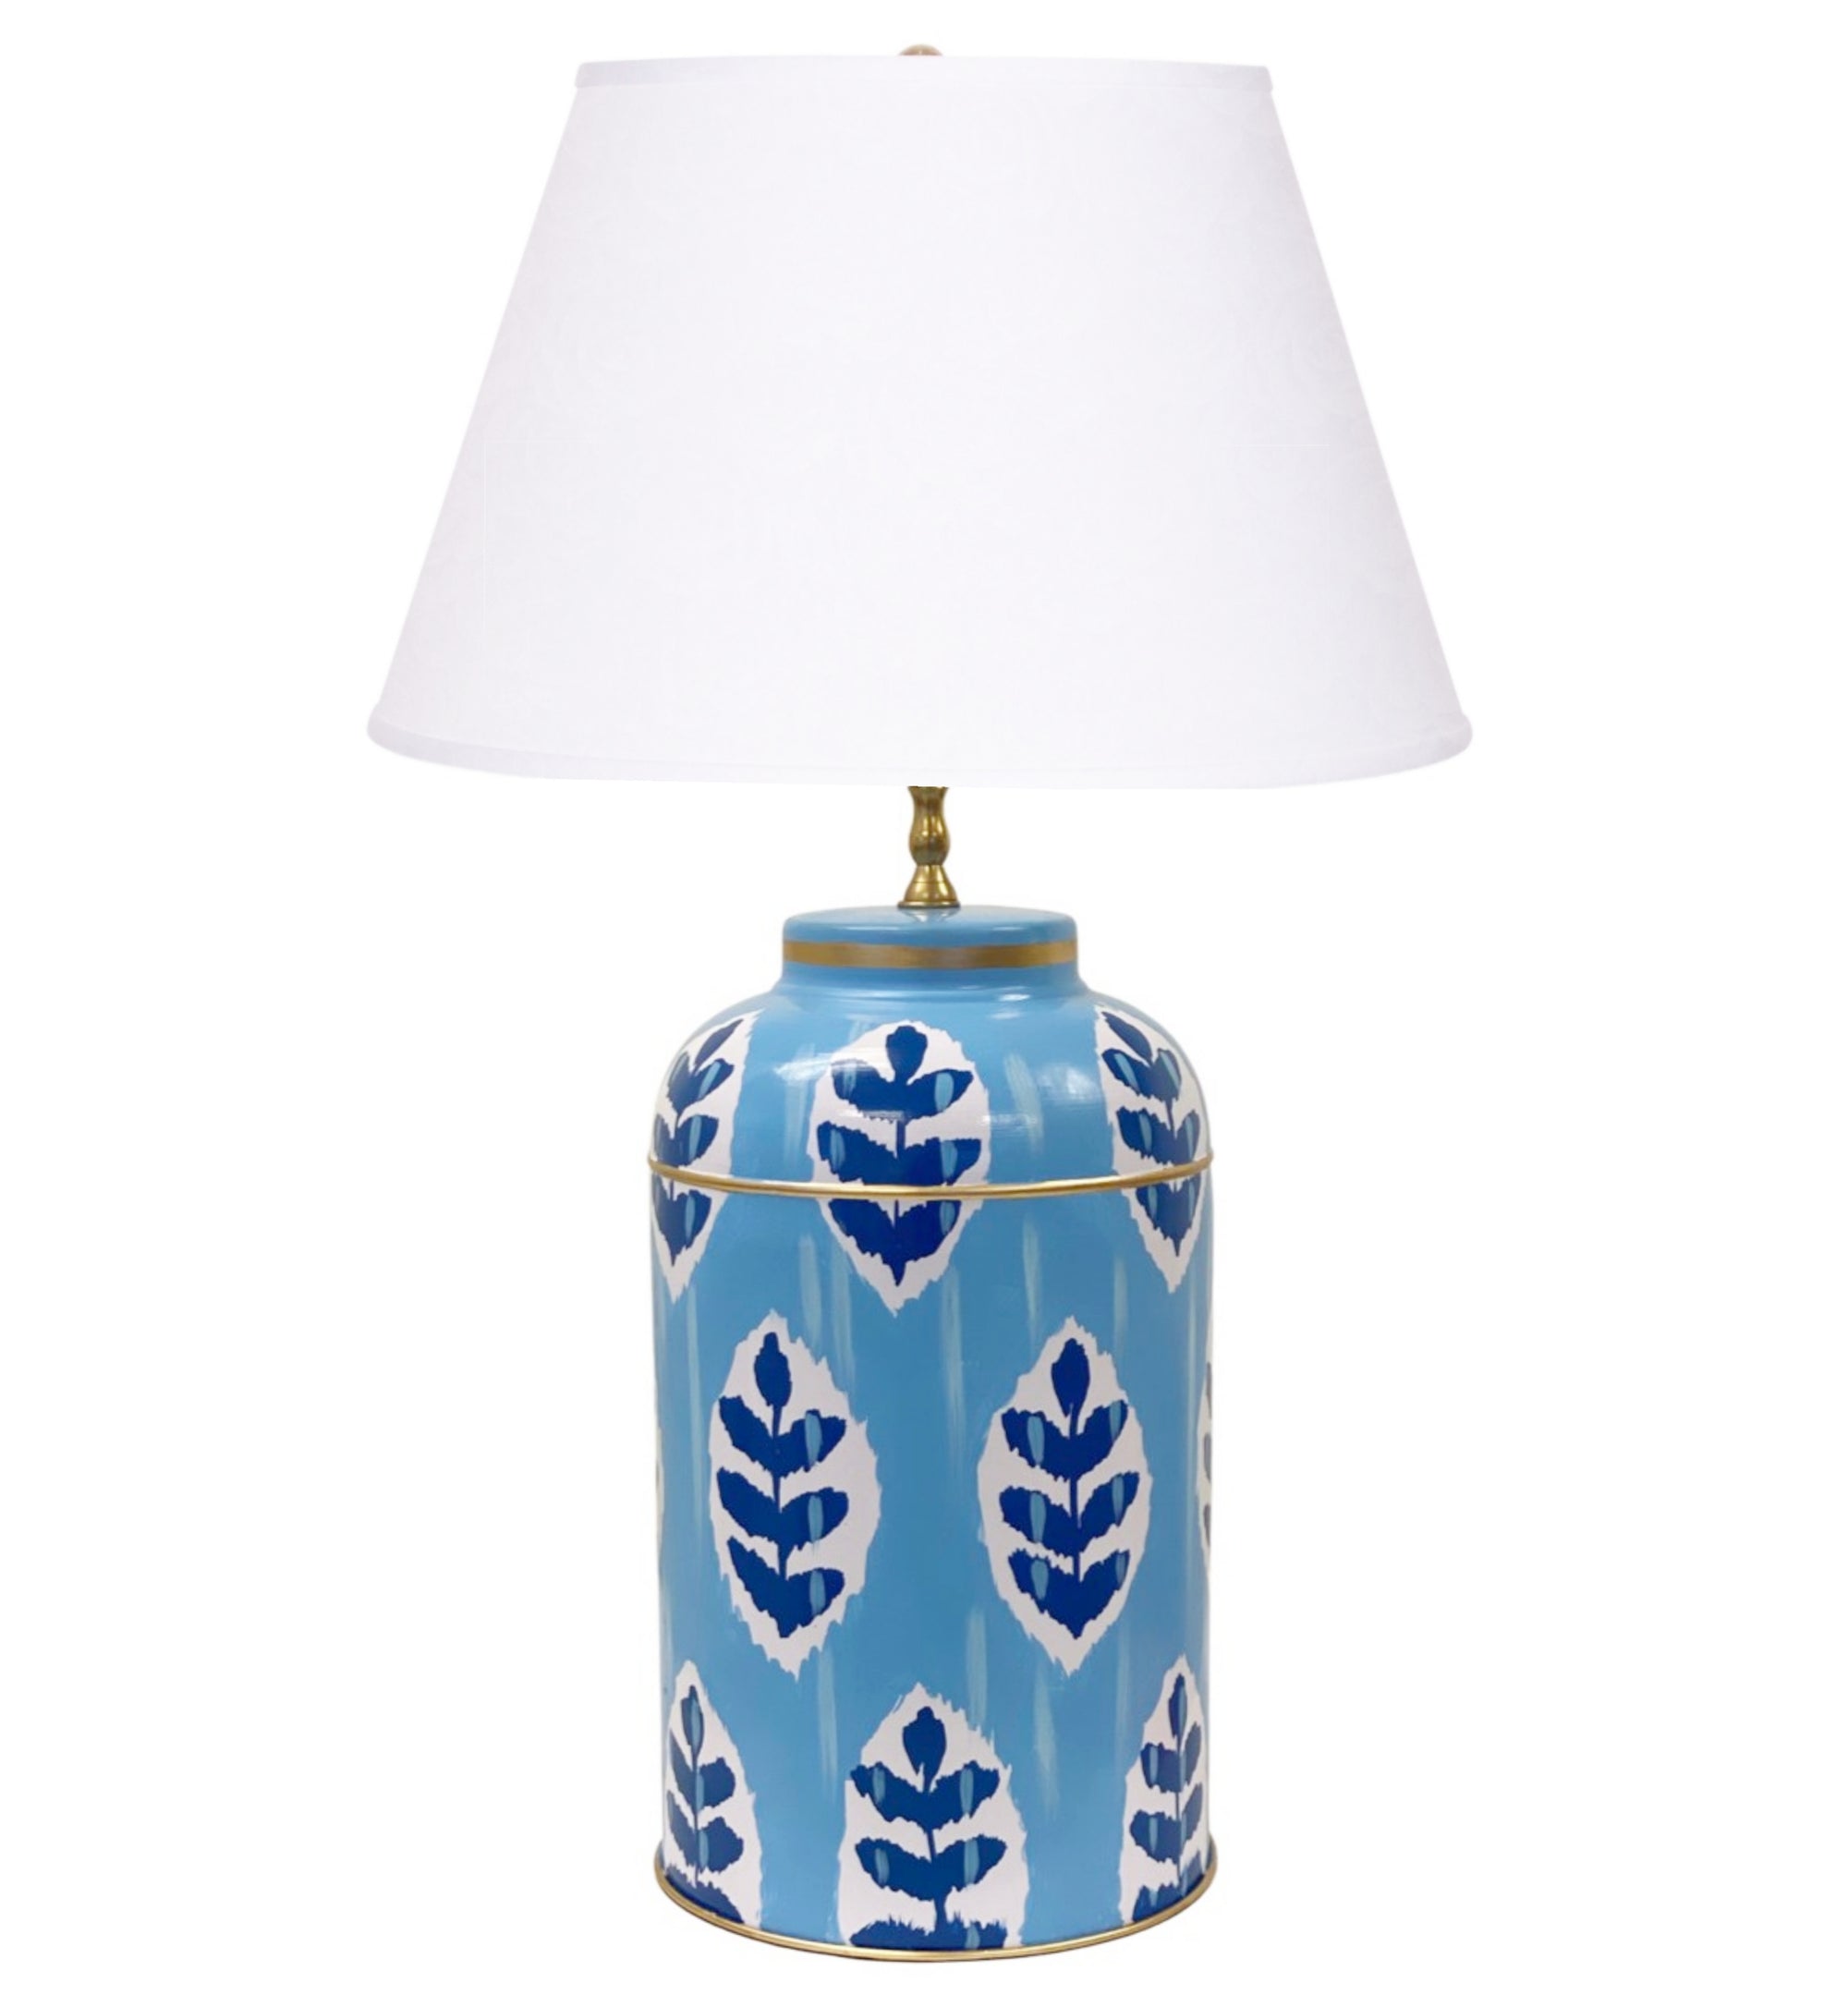 Dana Gibson Louvre Ikat Tea Caddy Lamp in Blue with White Linen Shade